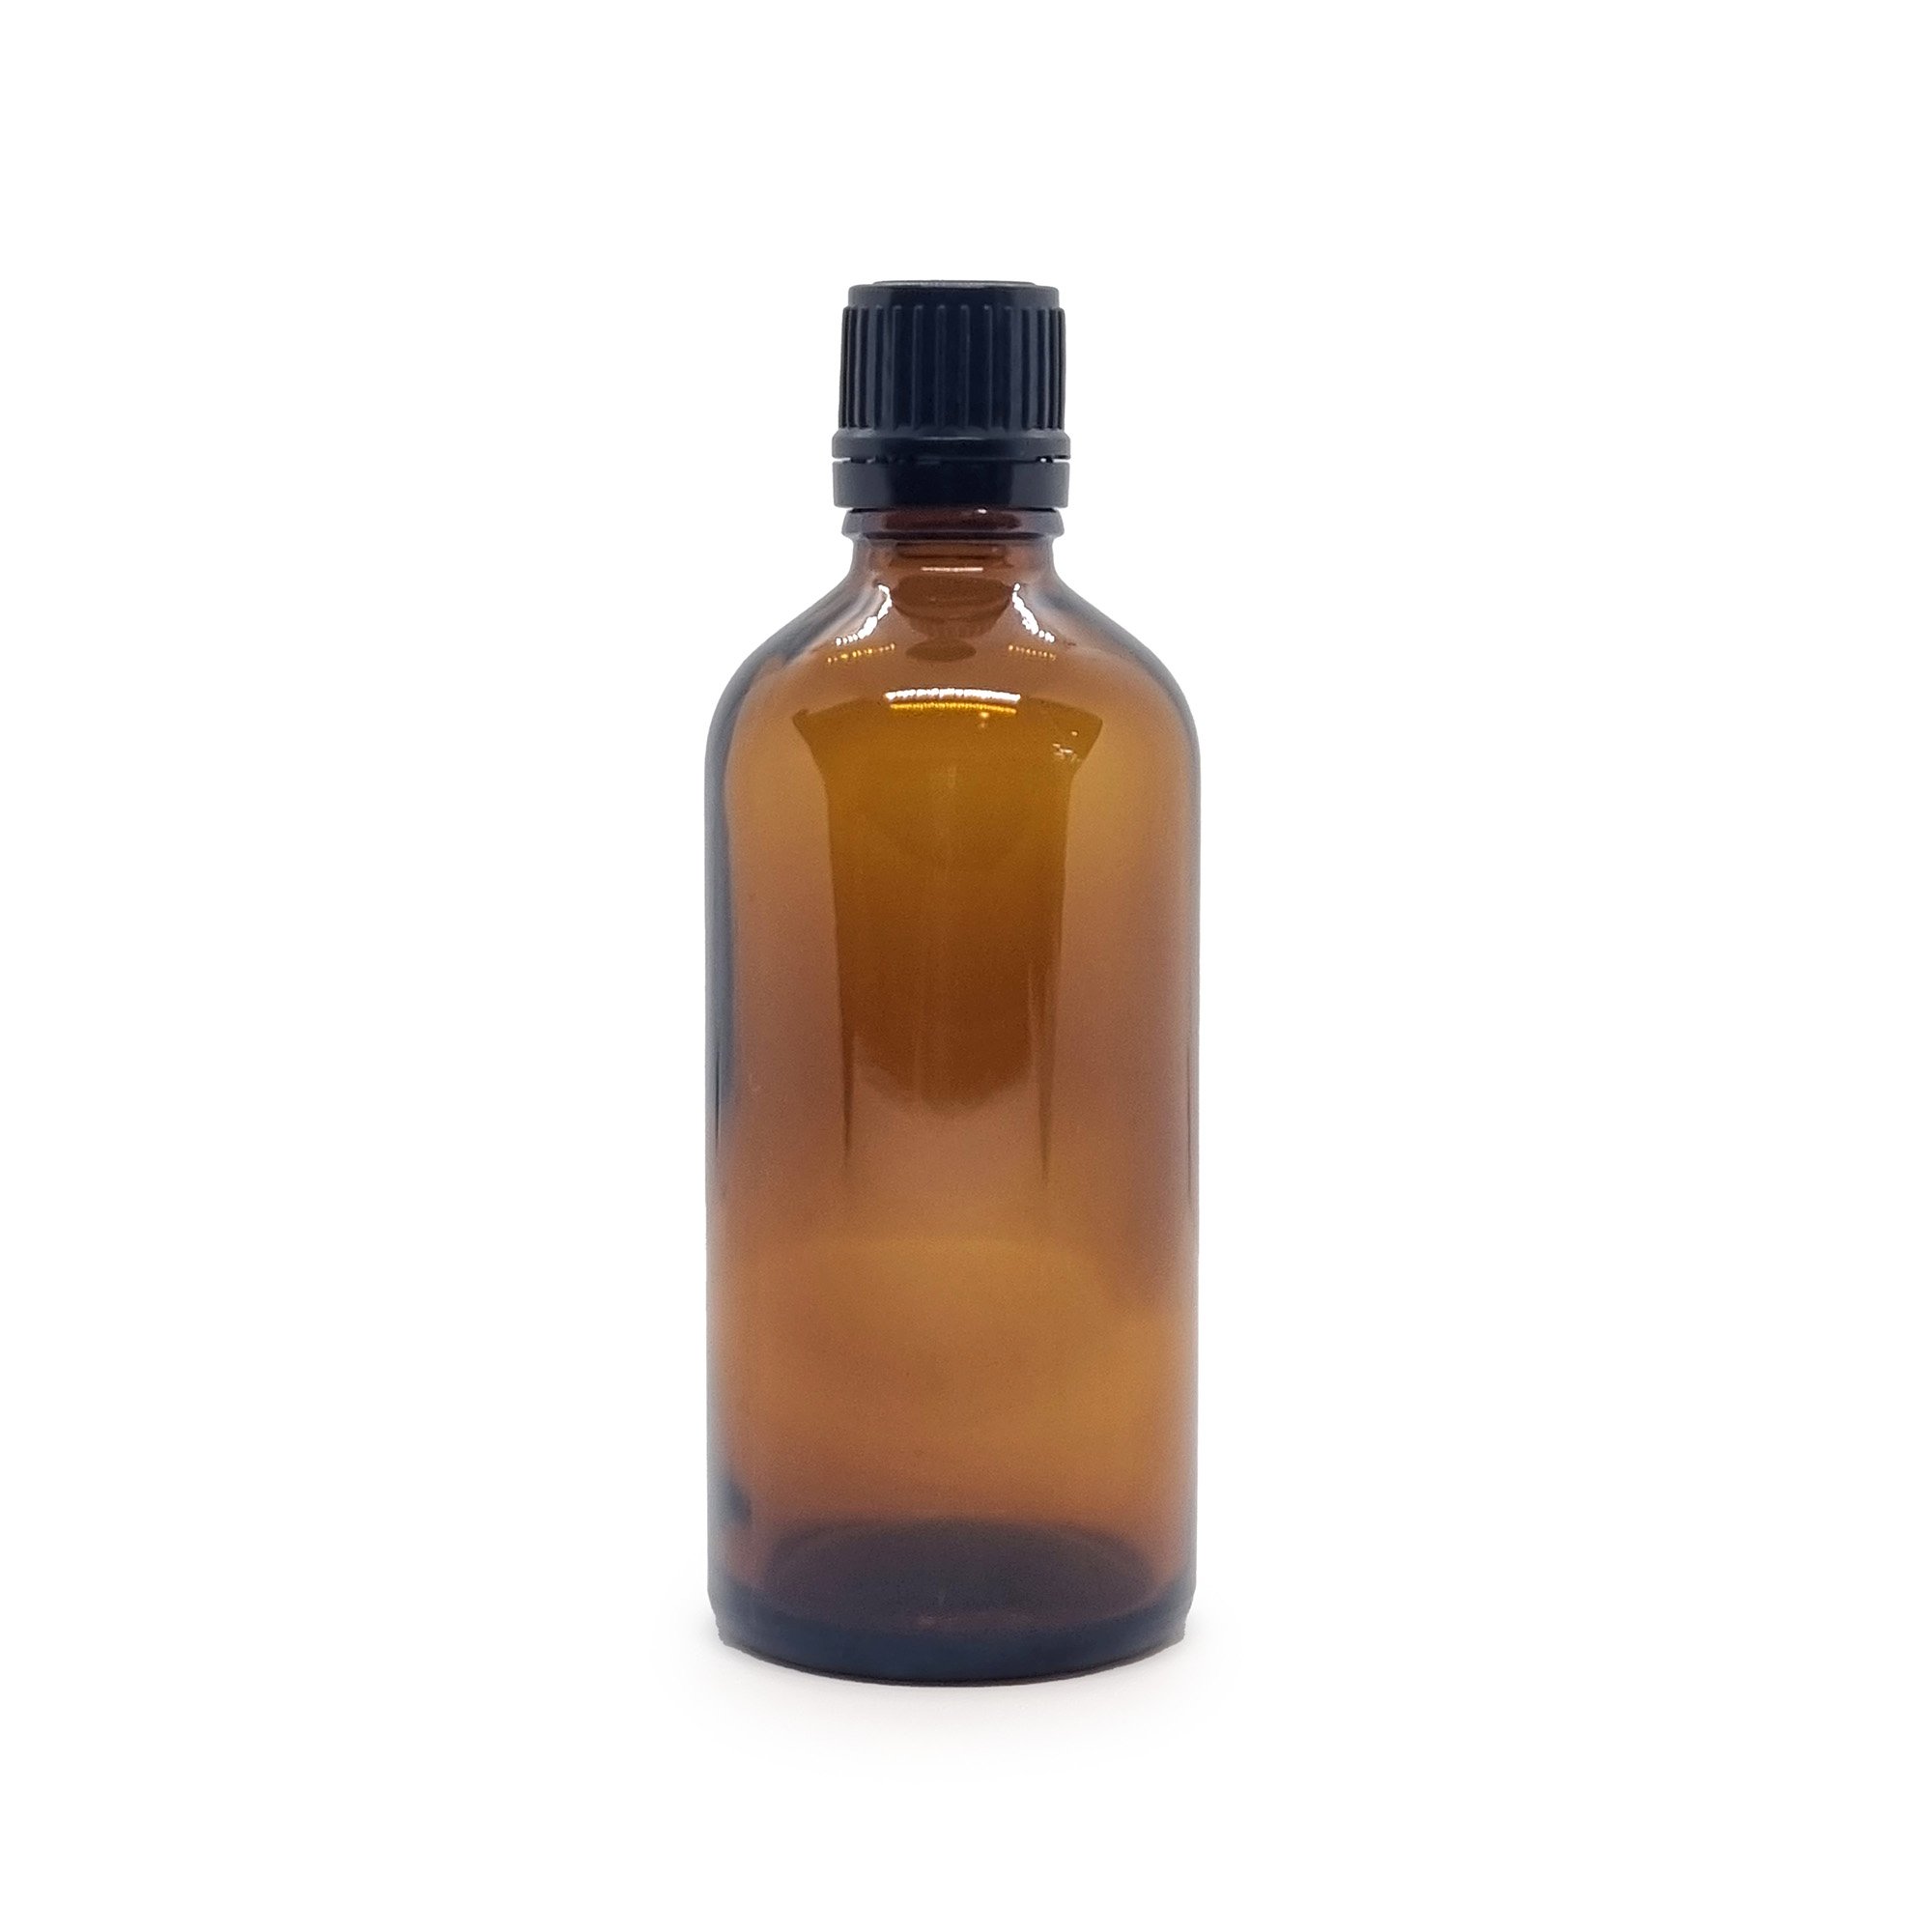 100ML AMBER GLASS BOTTLE WITH BLACK CAP